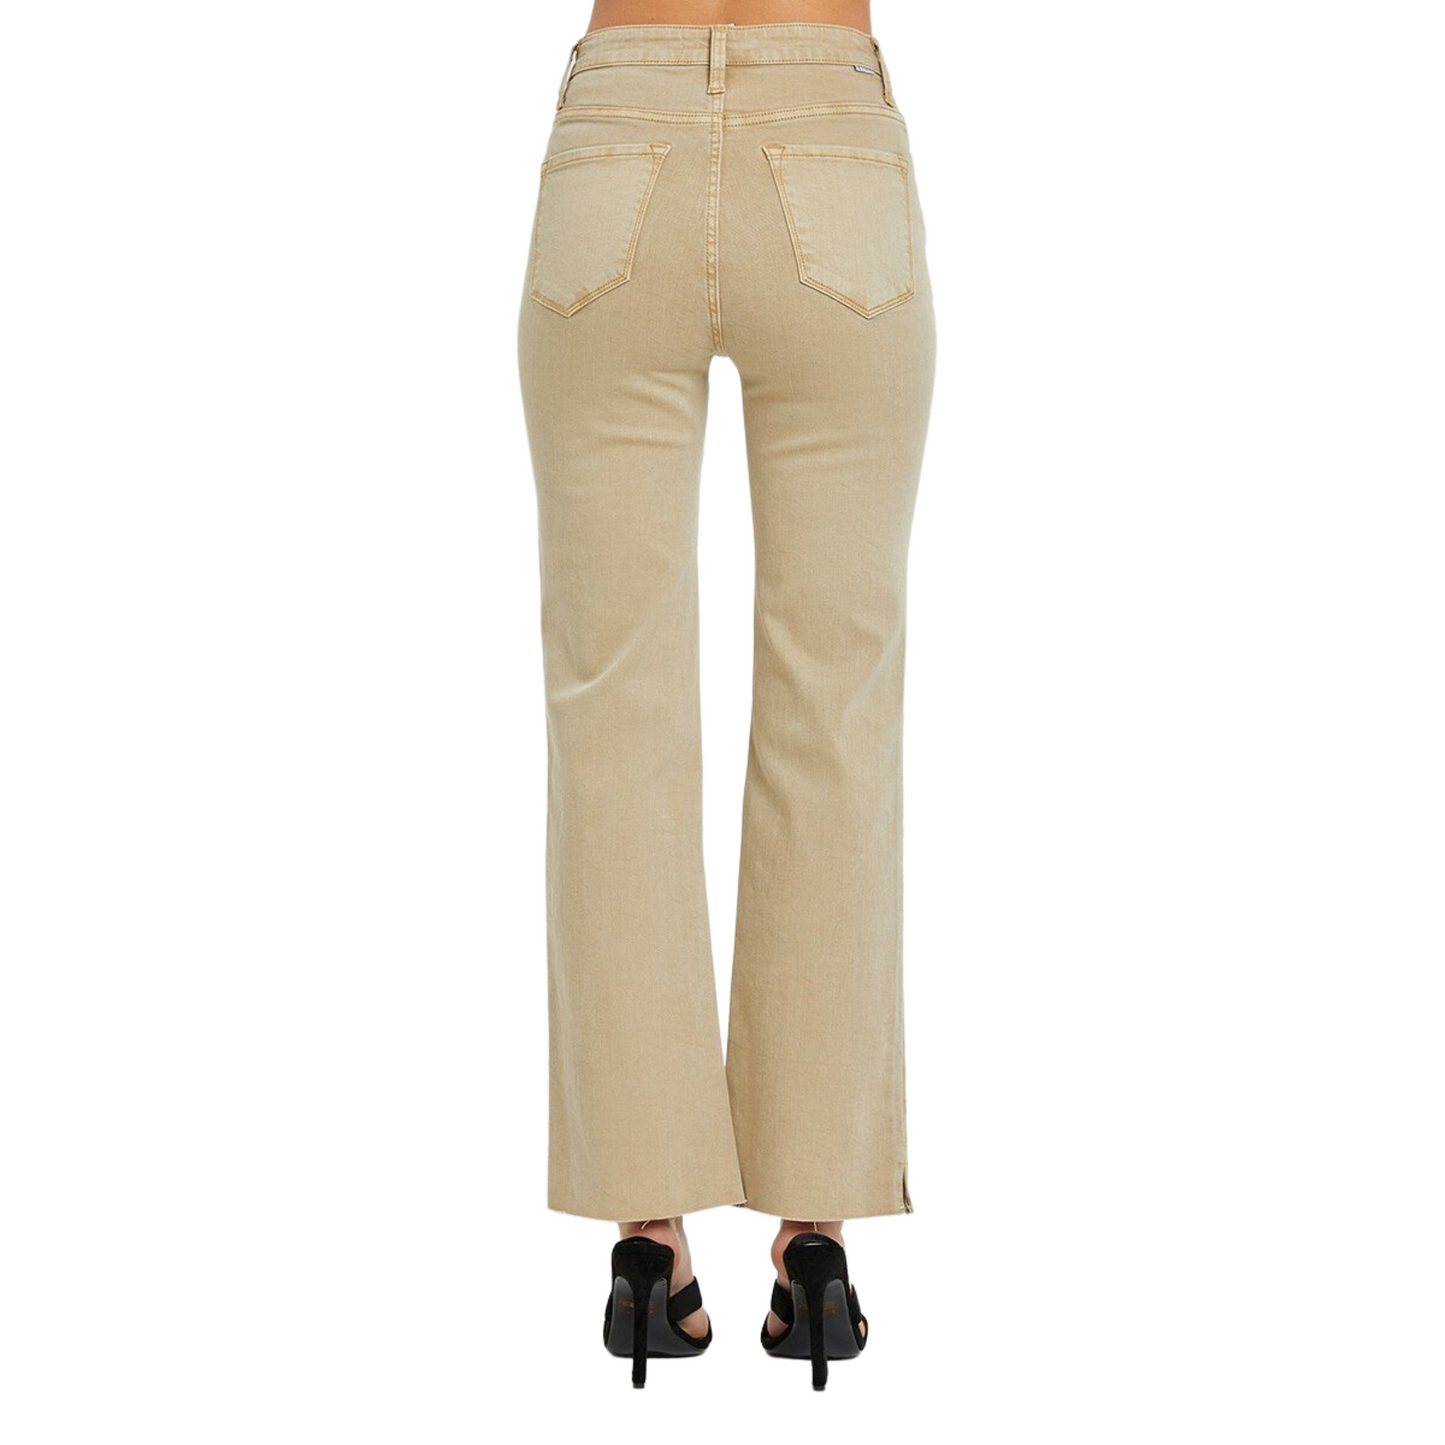 These High Rise Tummy Control Straight Pants are perfect for any occasion. The sand color, raw hem, and straight leg design provide a classic and timeless look. Additionally, the pants come with built-in tummy control to ensure you look your best and feel your best.